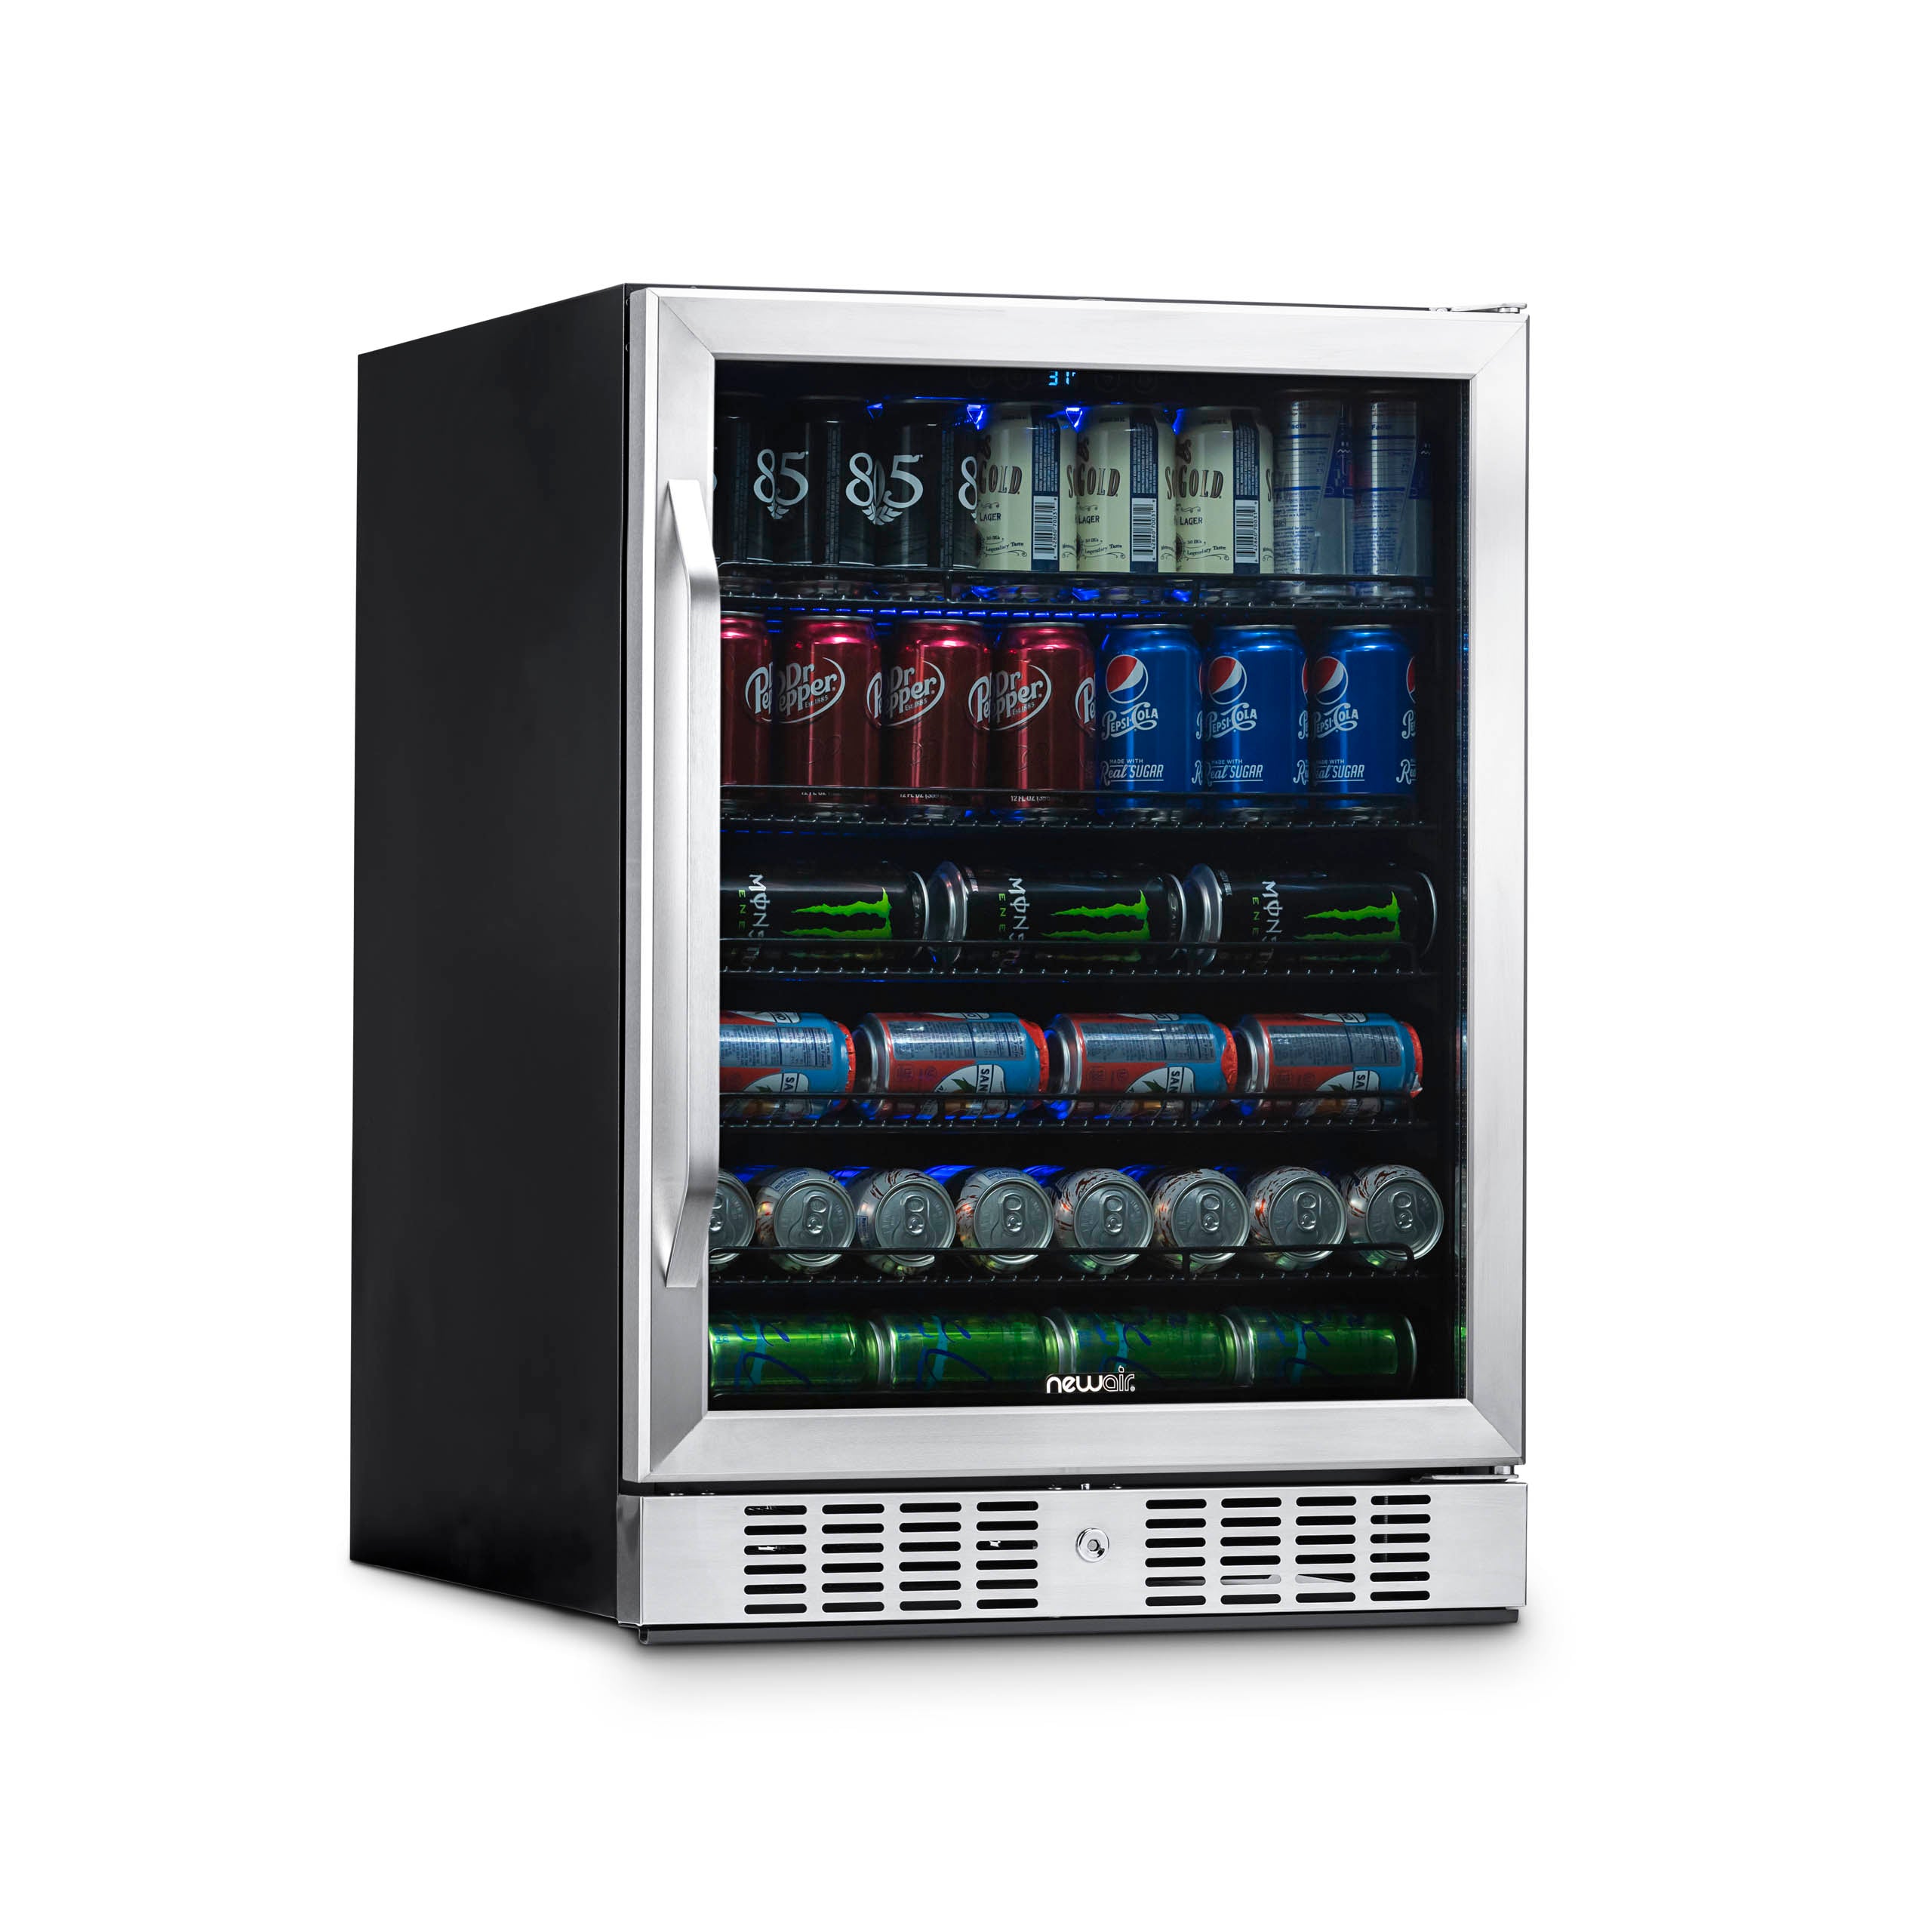 Newair 24" Built-in 177 Can Beverage Fridge in Stainless Steel with Precision Temperature Controls and Adjustable Shelves